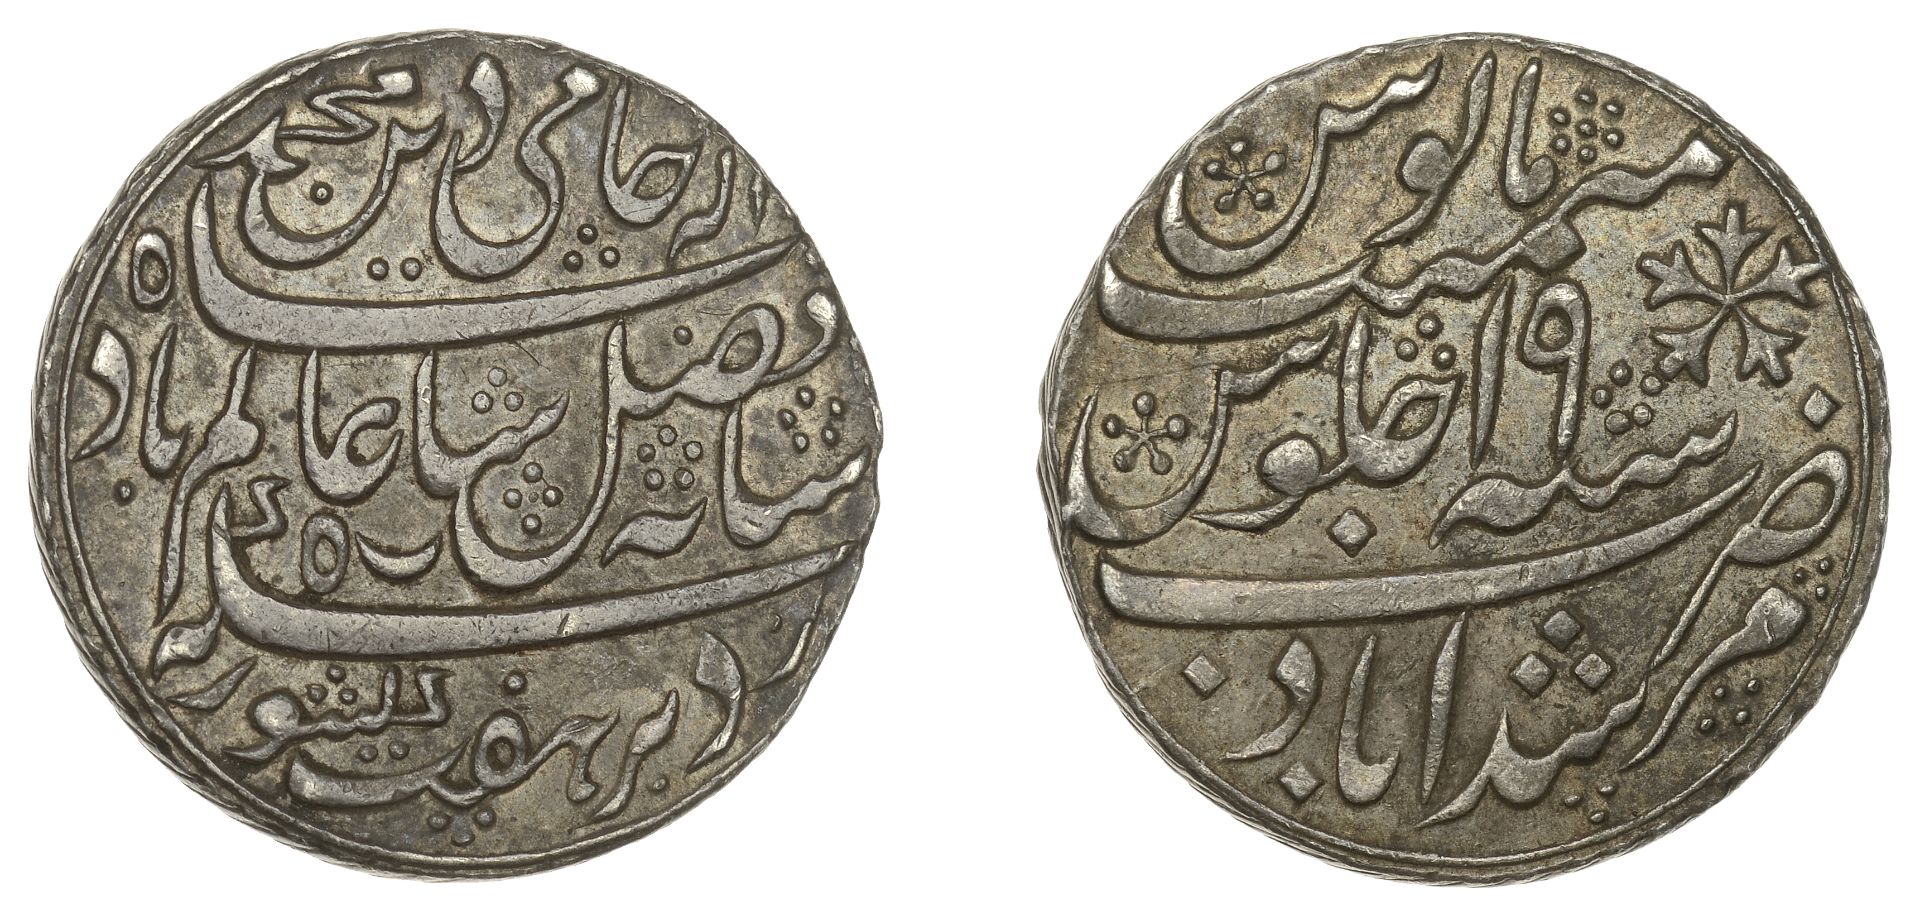 East India Company, Bengal Presidency, Dacca Mint: Second milled issue, silver Rupee in the...